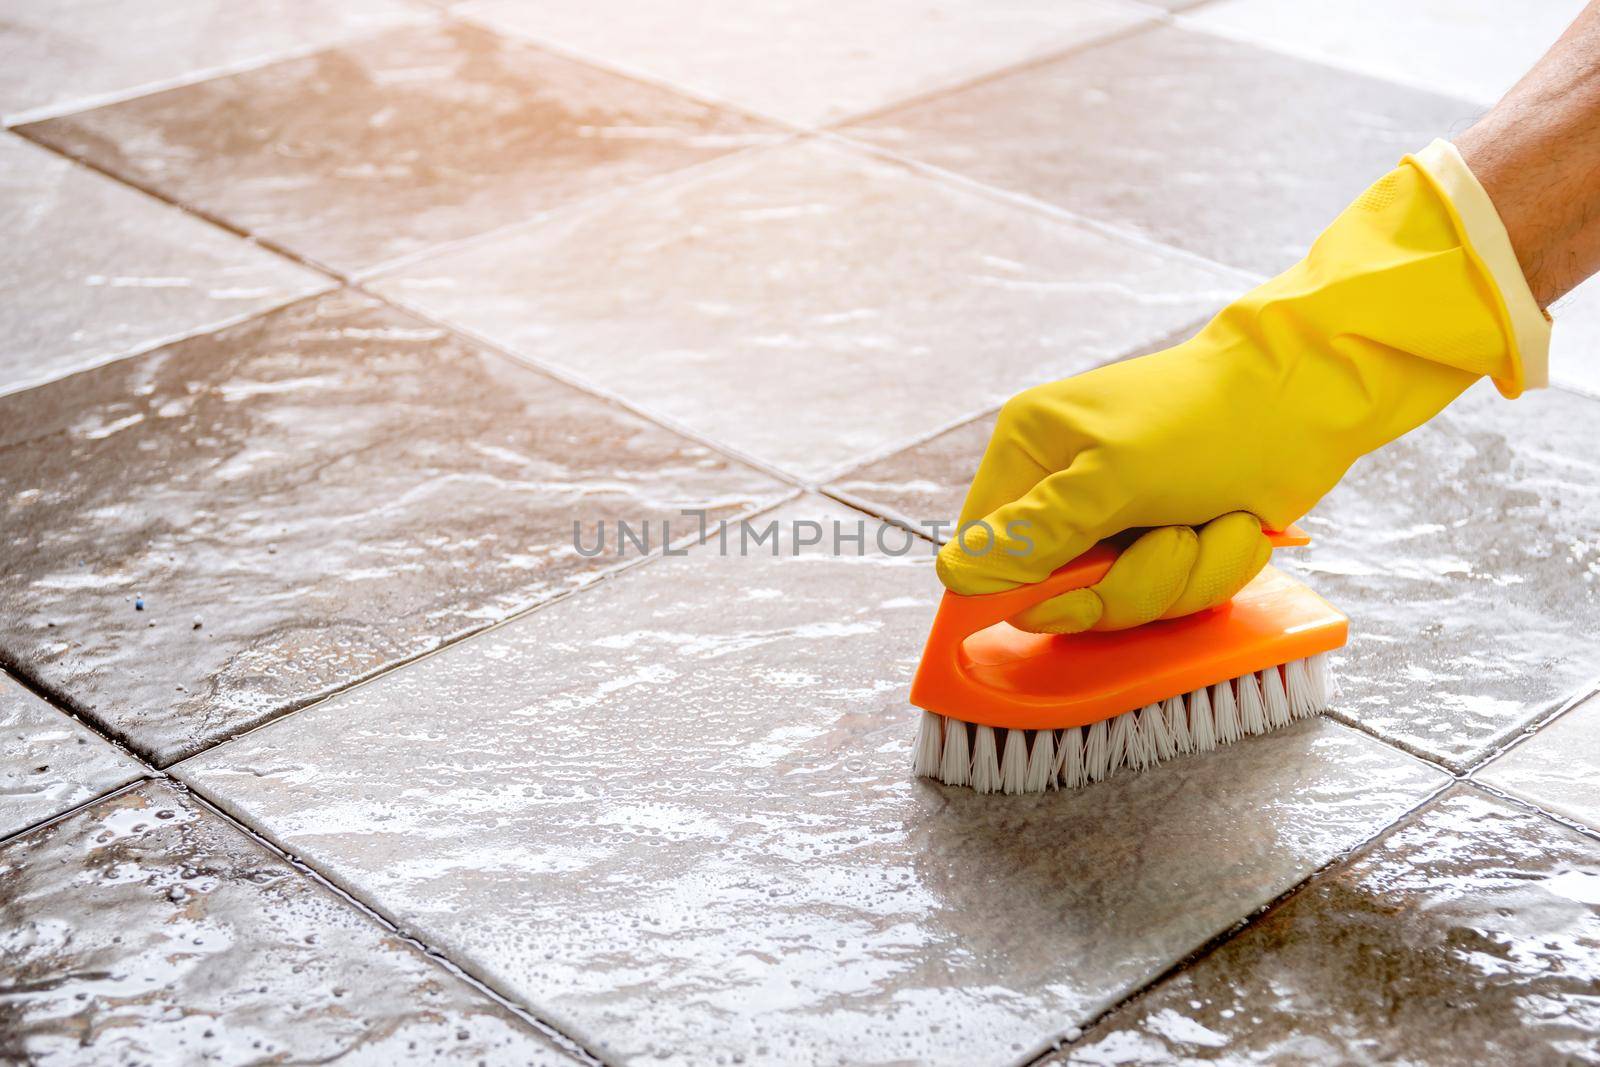 Hands wearing yellow rubber gloves are using a plastic floor scrubber to scrub the tile floor with a floor cleaner. by wattanaphob